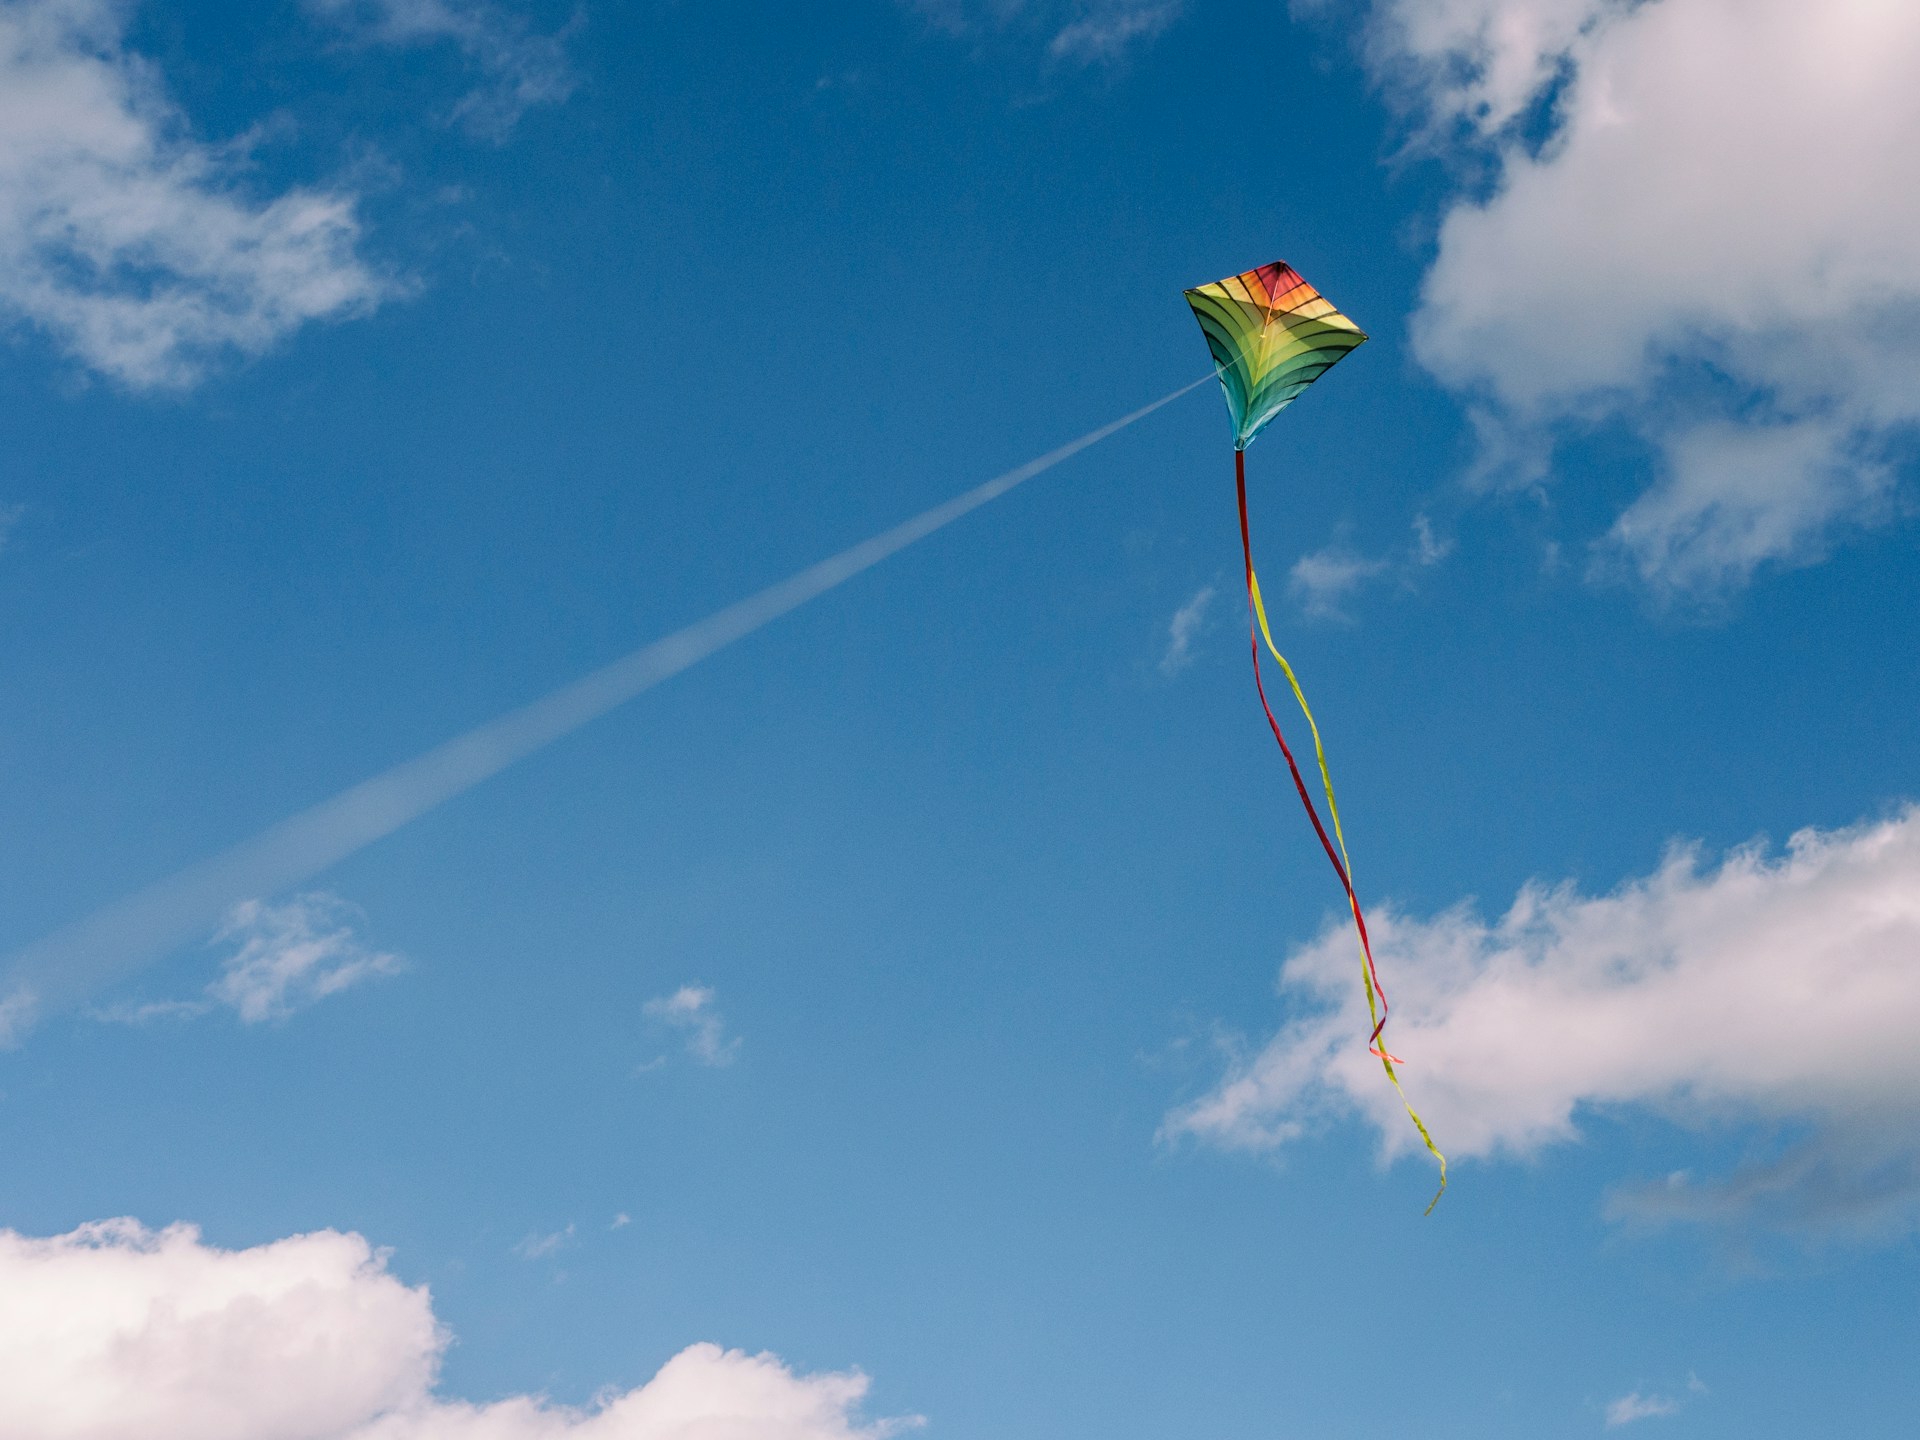 A colorful kite with red, yellow, and green shades soars in a clear blue sky with a few scattered white clouds, reminiscent of the calm found in mental health treatment. The kite has two long, trailing ribbons adding movement to the image.